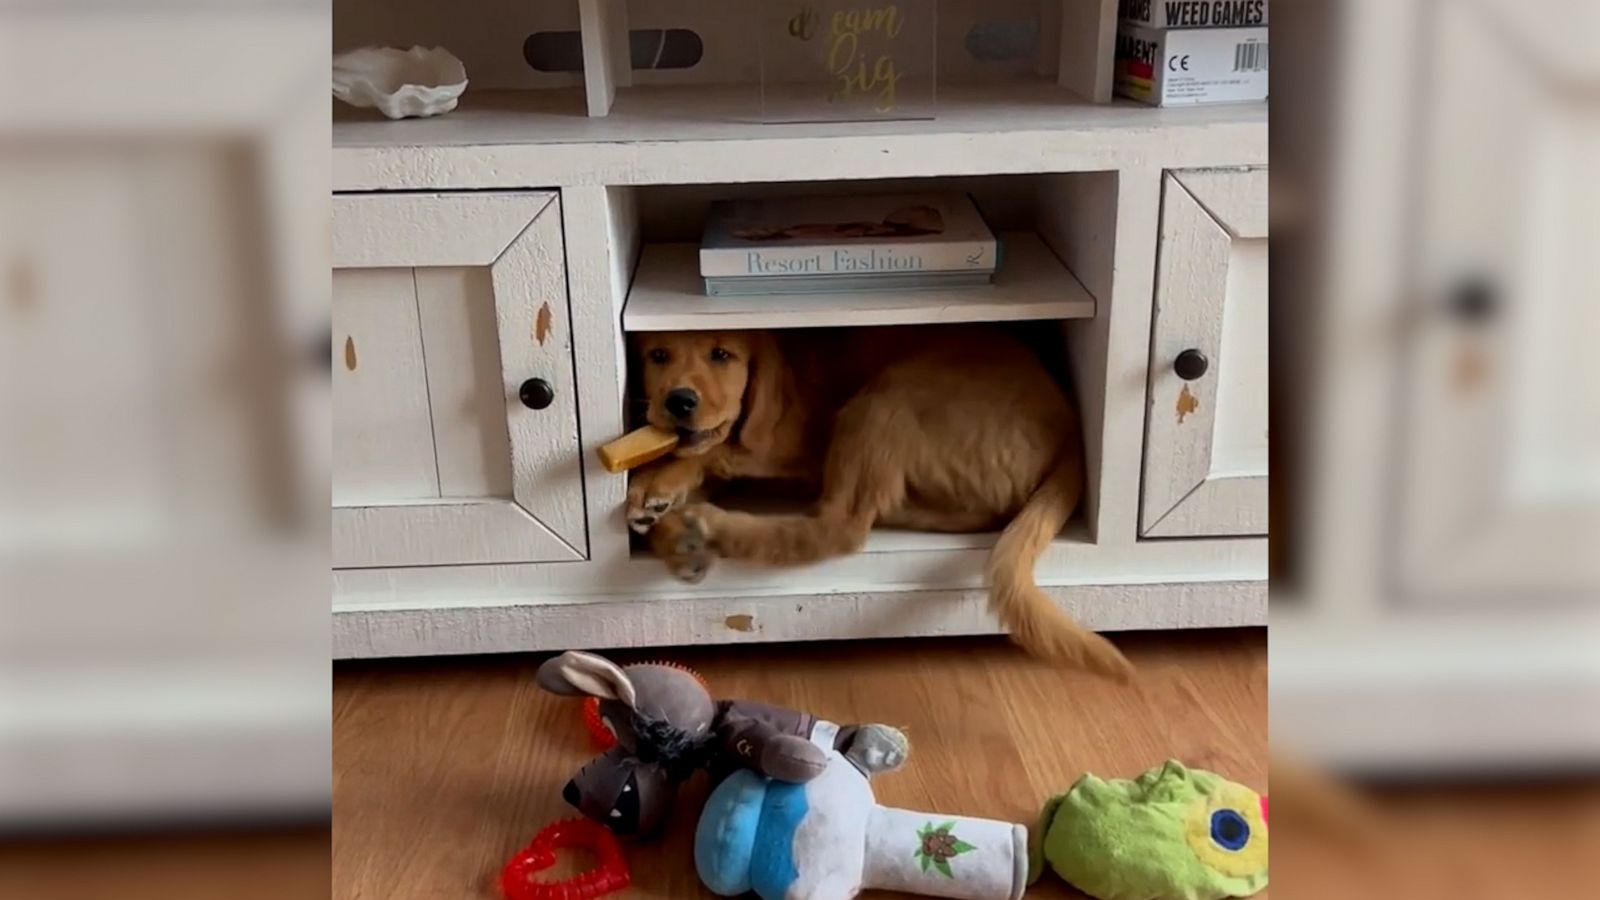 VIDEO: Golden retriever puppy is too big for his favorite cozy spot